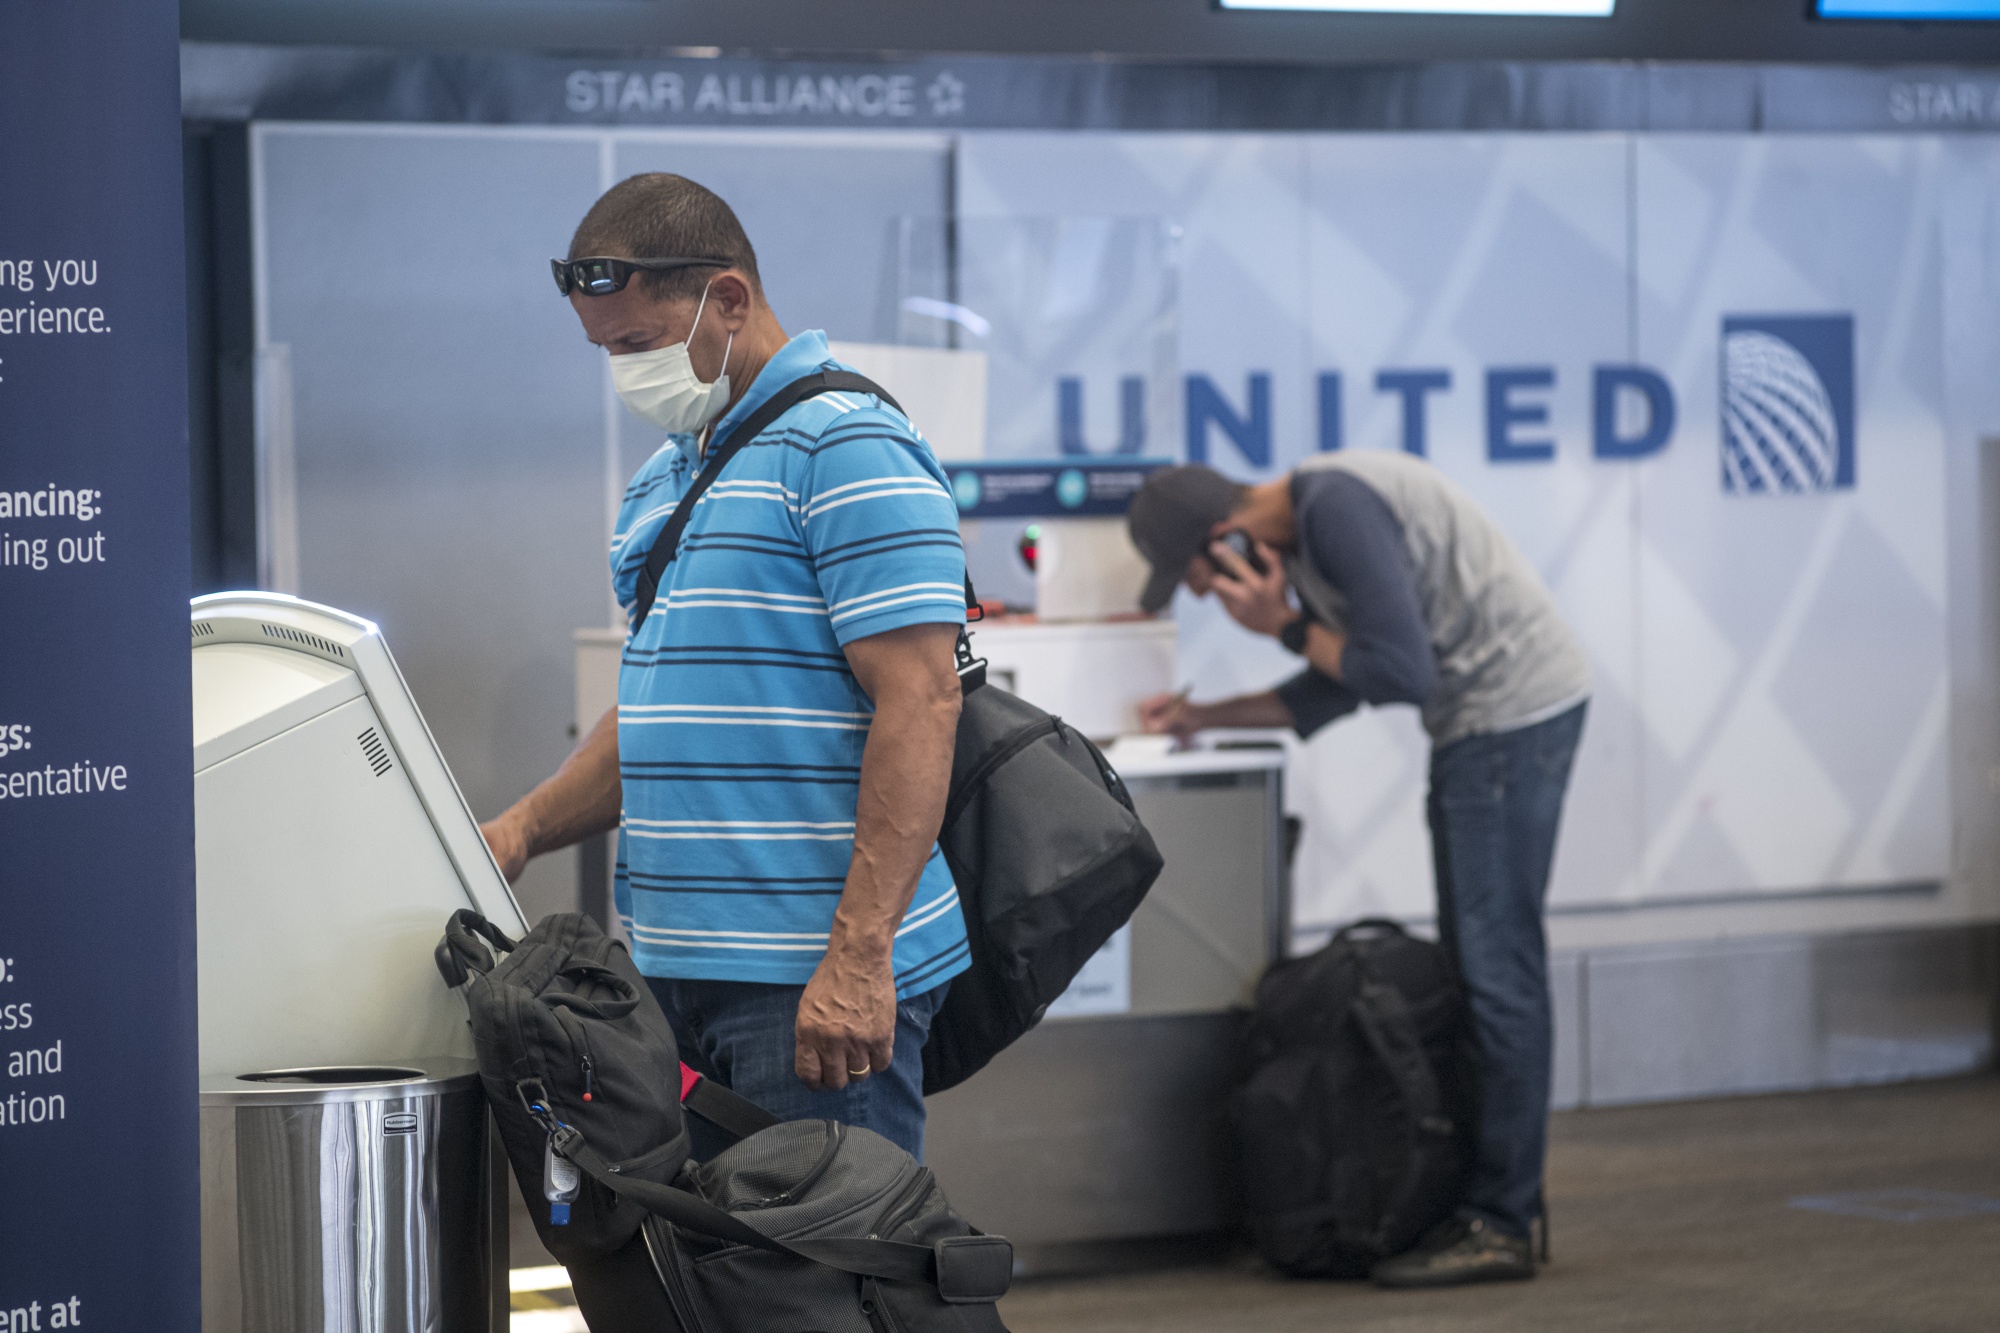 A traveler&nbsp;uses a kiosk to check-in at a United counter at San Francisco International Airport&nbsp;on&nbsp;July 1.